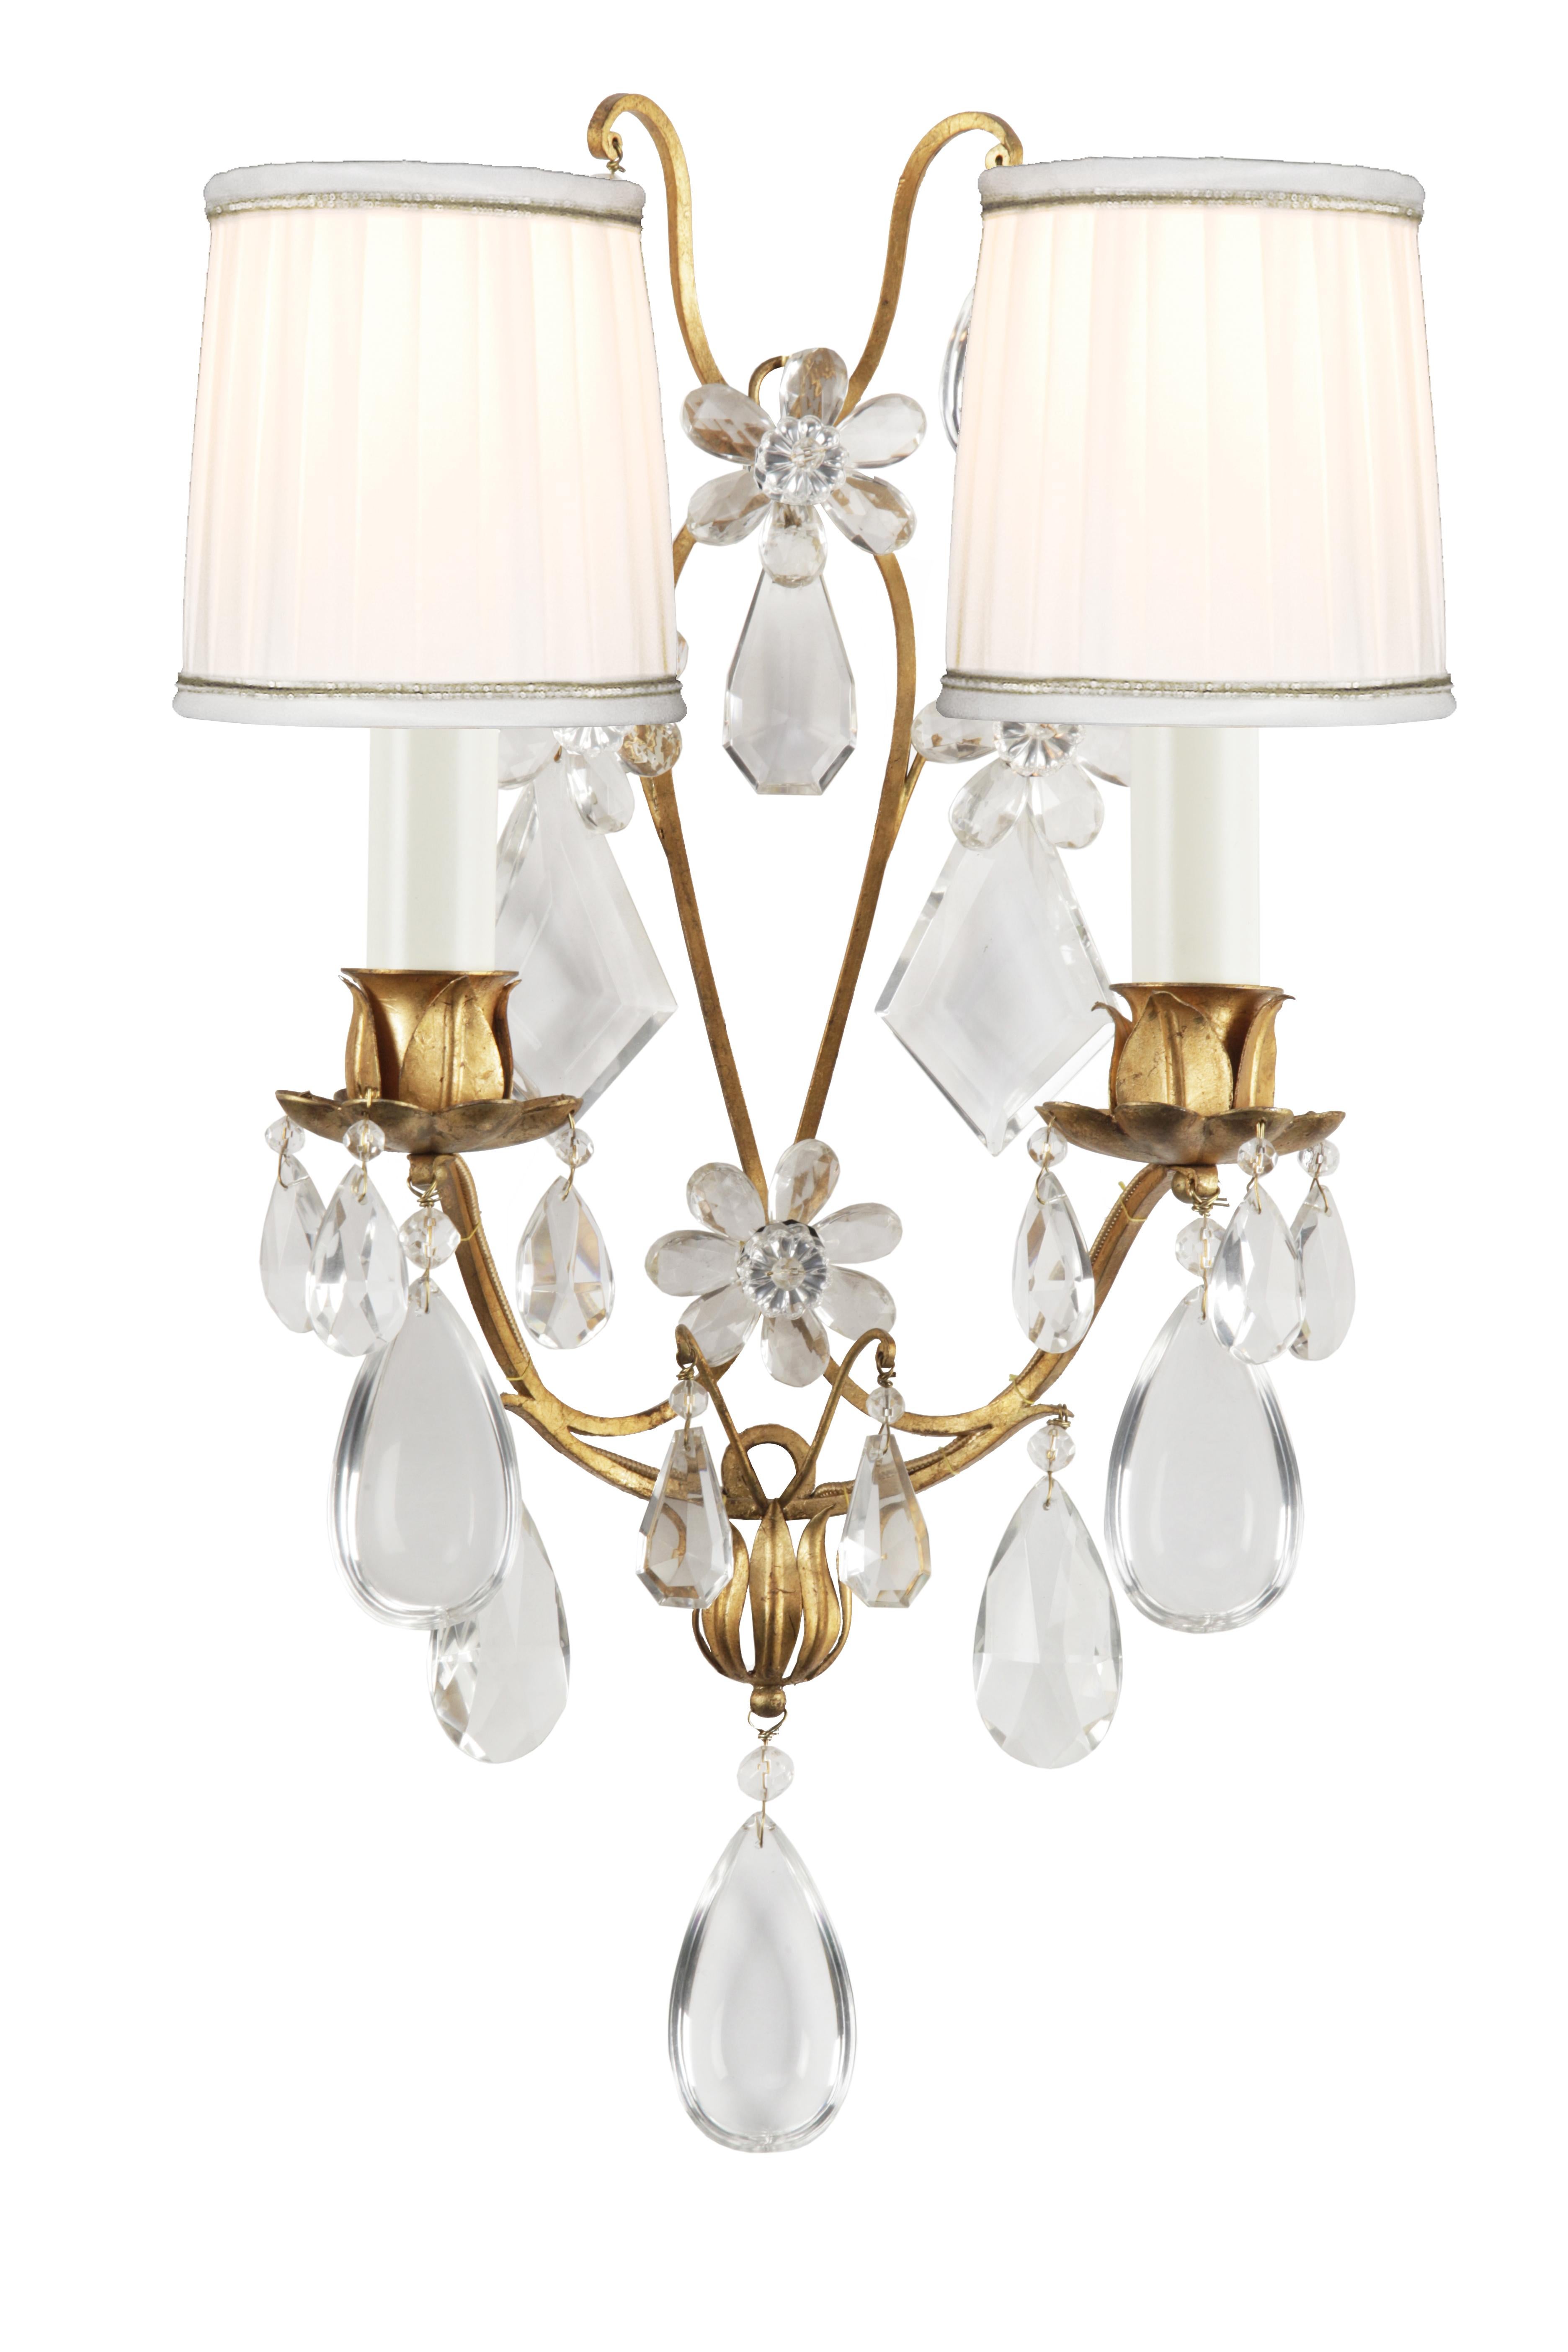 AP-FE-07127-02 Maison Baguès wall sconce 2 lights
Gold or silver gilding
Fine ironwork and crystal

Can be UL listed for an extra fee.
Shades are available. 
Can be sold single (1) sconce or as a pair (2). 

Please note that we are the